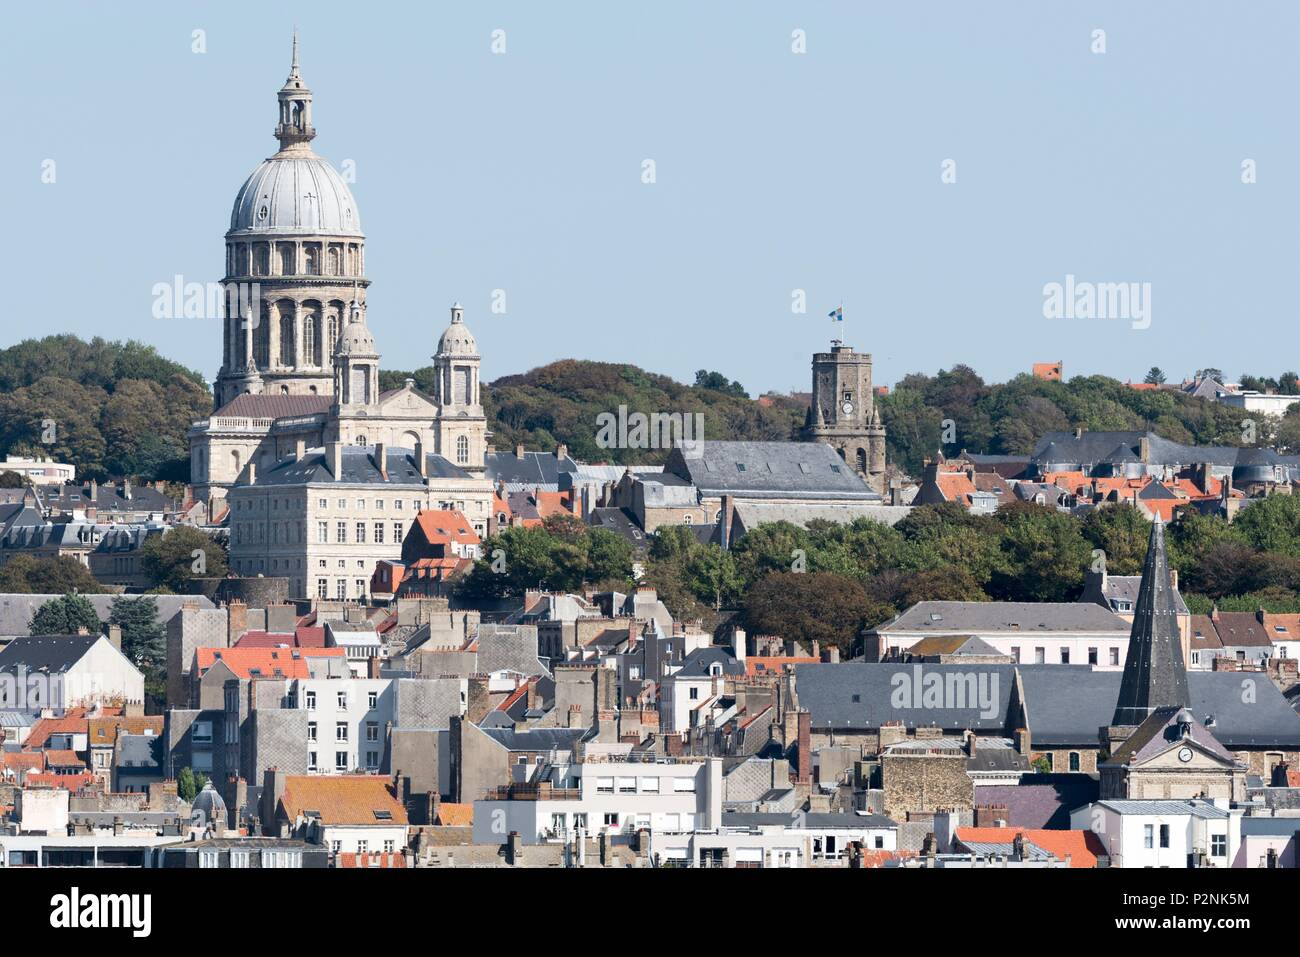 France, Pas de Calais, Boulogne sur Mer, the city and the Our Lady of the Immaculate Conception Basilica built between 1827 and 1866 and the old dungeon erected in the 12th century listed as world heritage of humanity by UNESCO Stock Photo